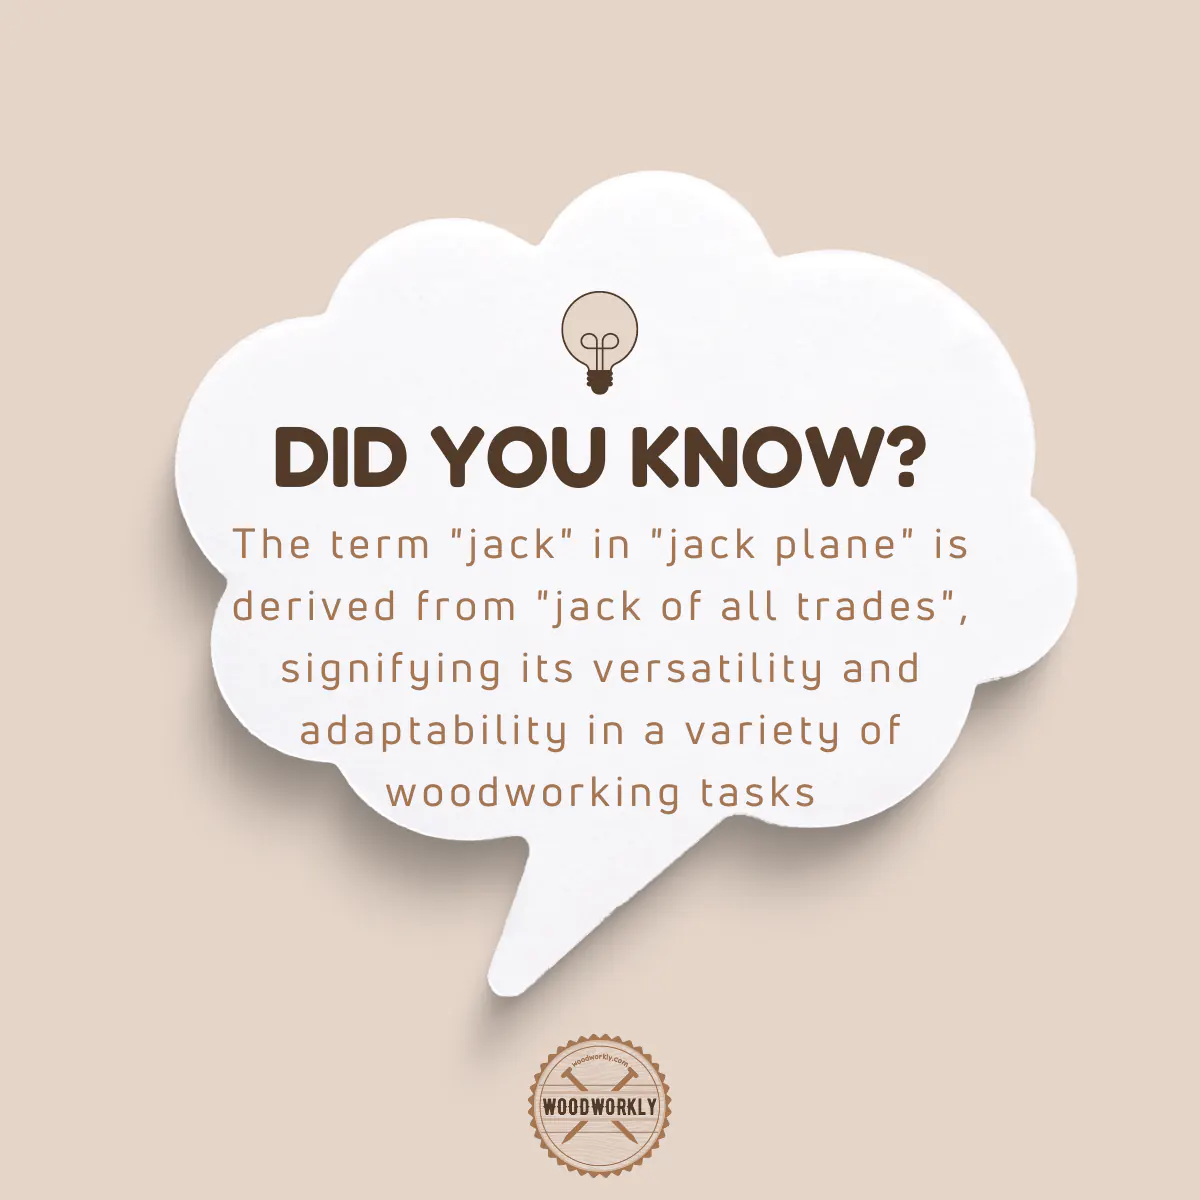 Did you know fact about jack plane